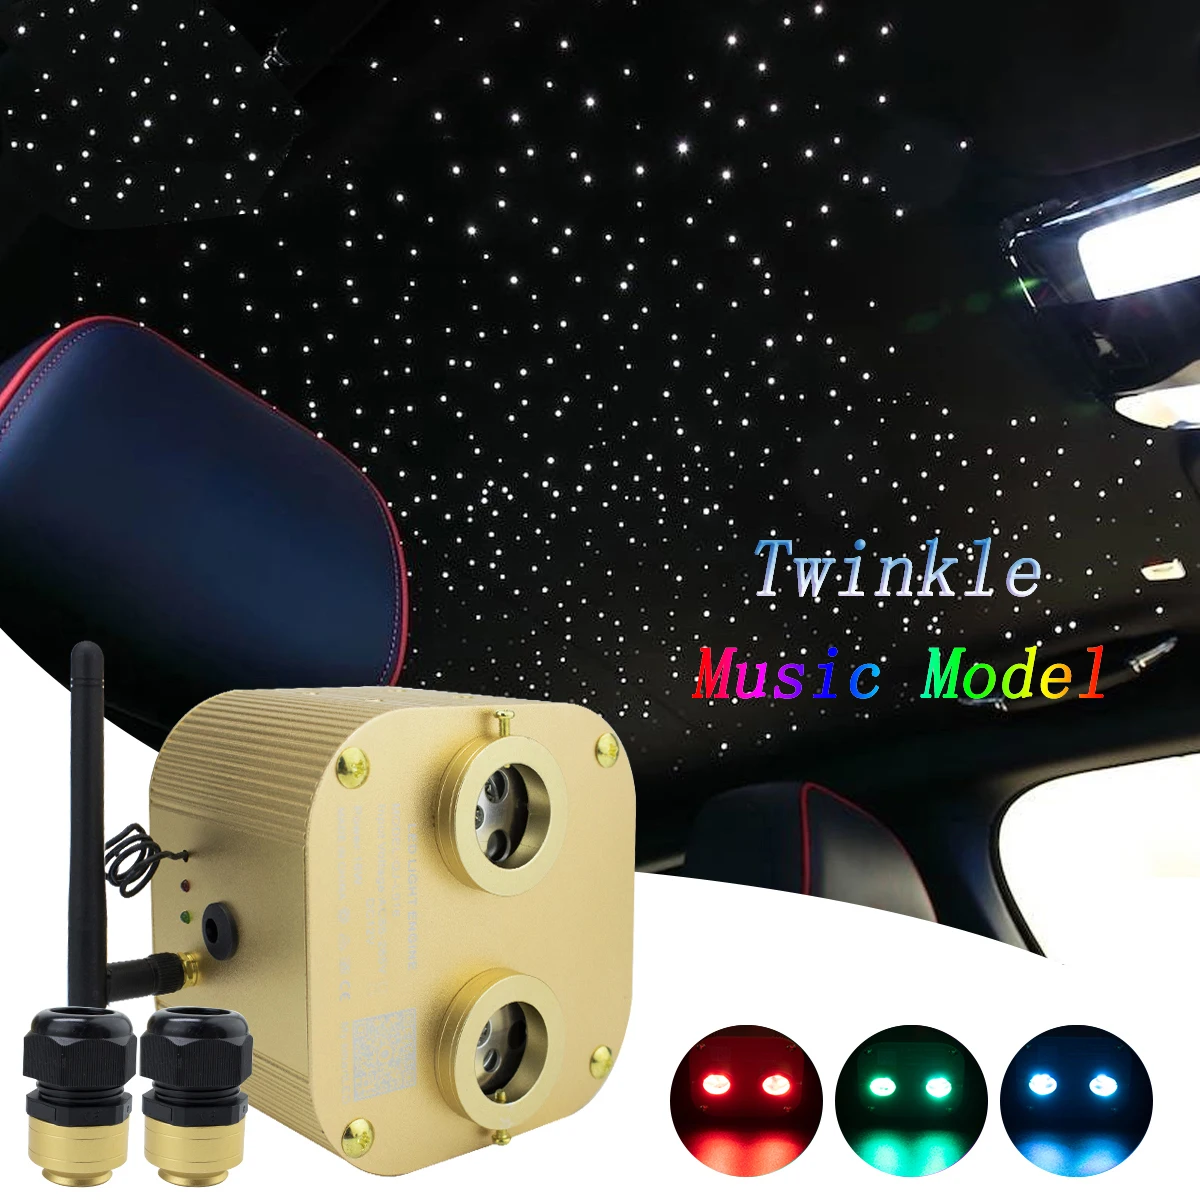 

CREE Chip 20W Twinkle RGBW LED Engine Driver Fiber Optic Light Source Bluetooth APP Control for All Fiber Optic Starry Ceiling